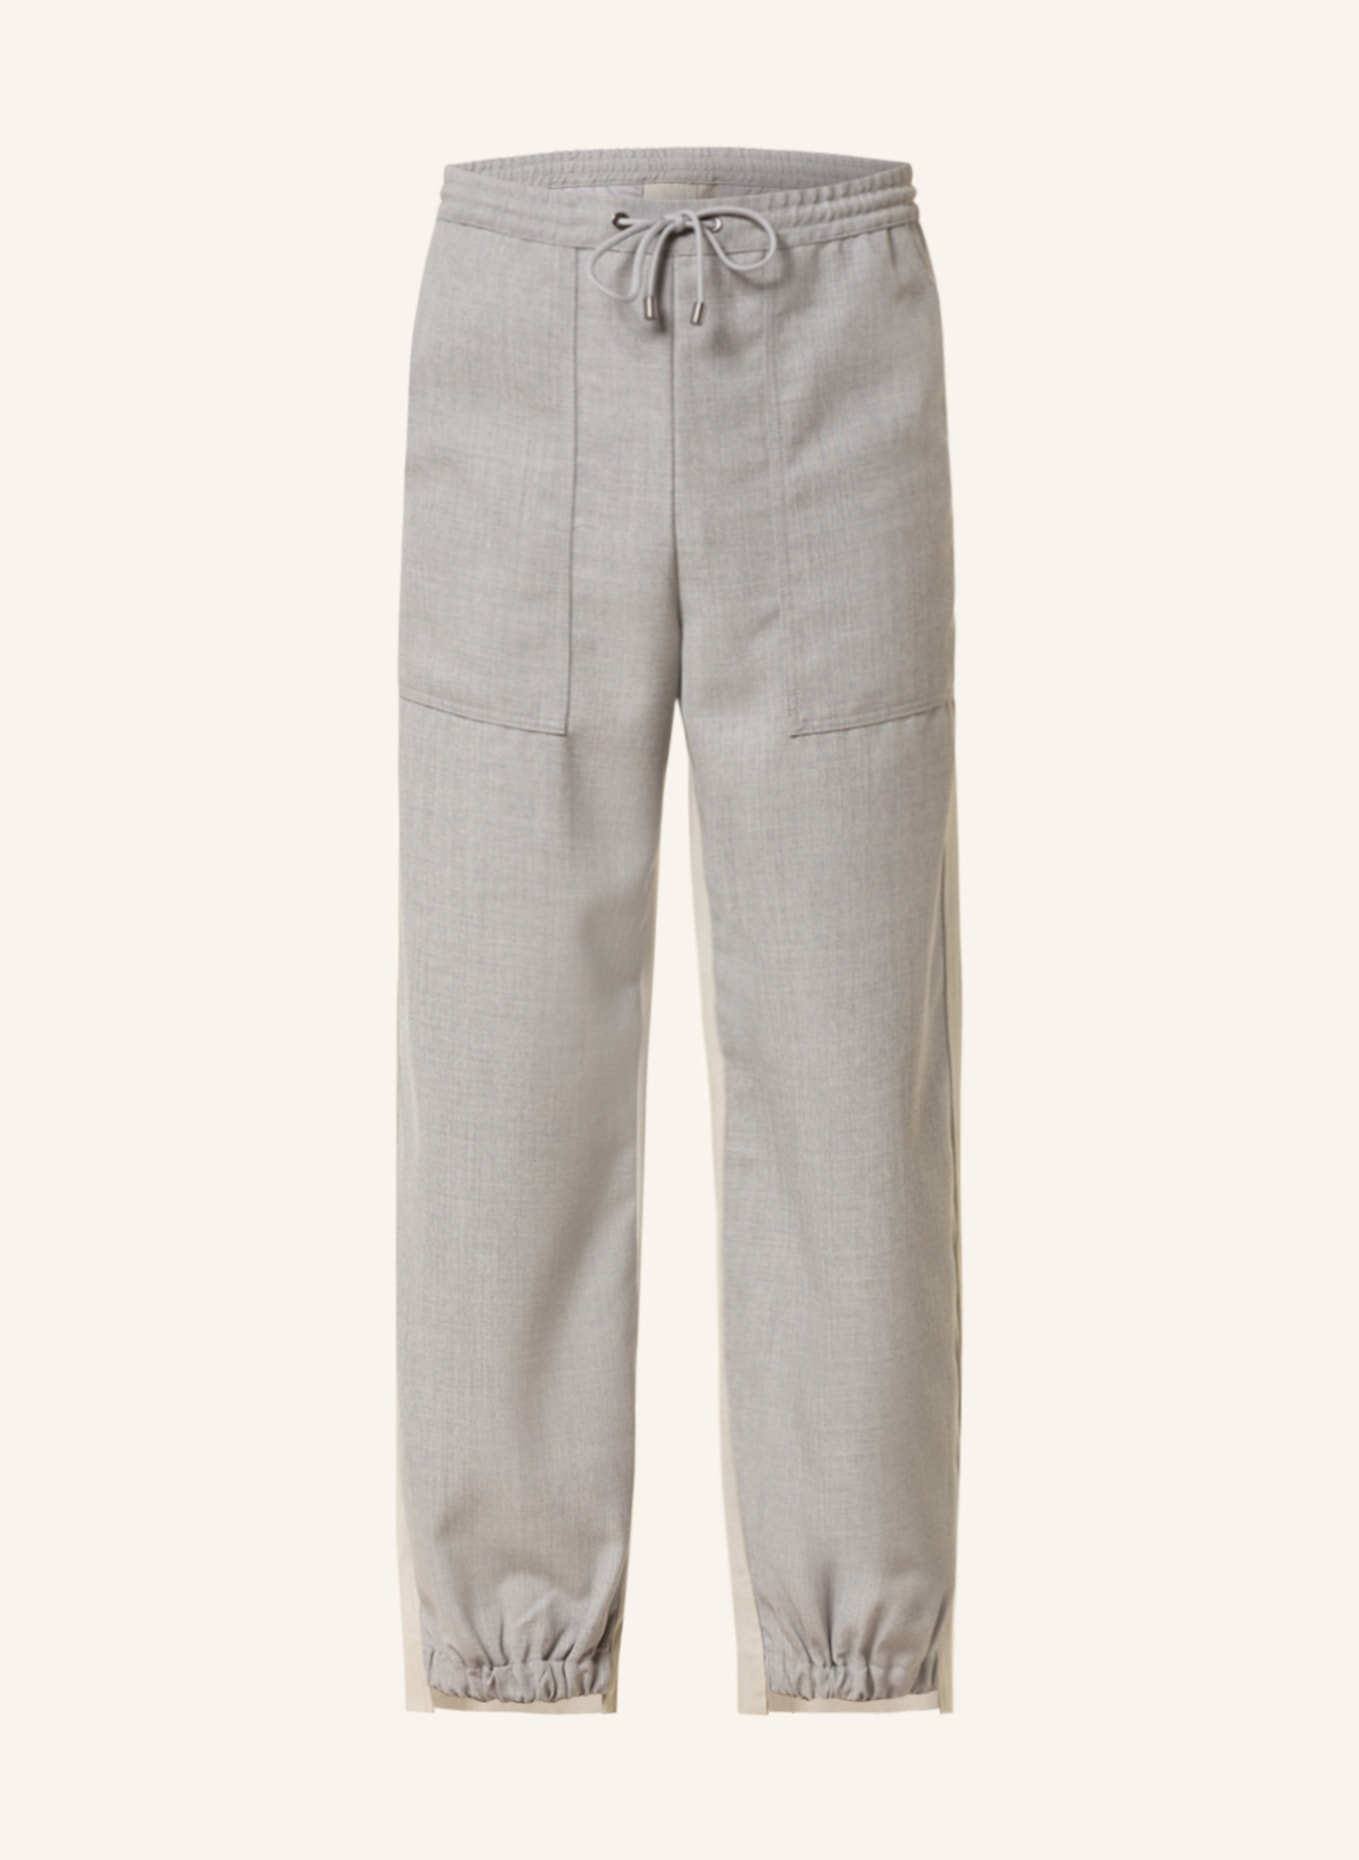 ETRO Pants in jogger style regular fit , Color: GRAY/ BEIGE (Image 1)